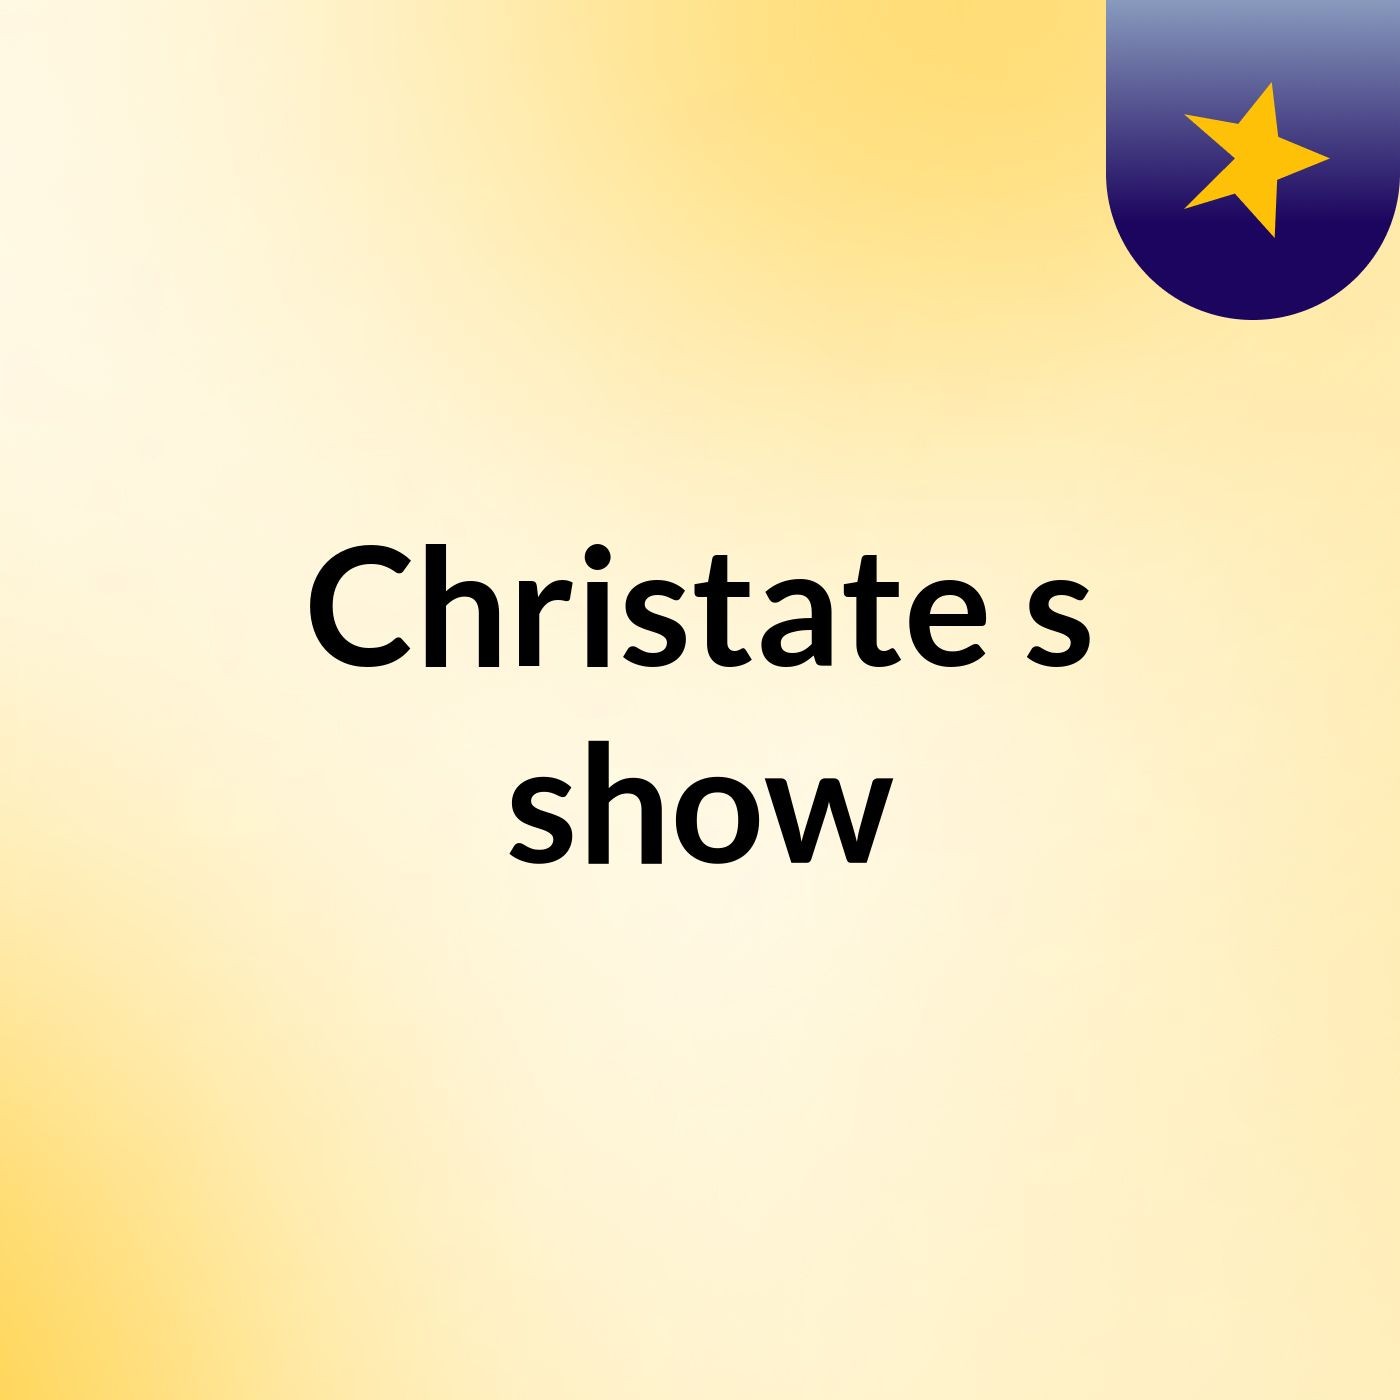 Christate's show